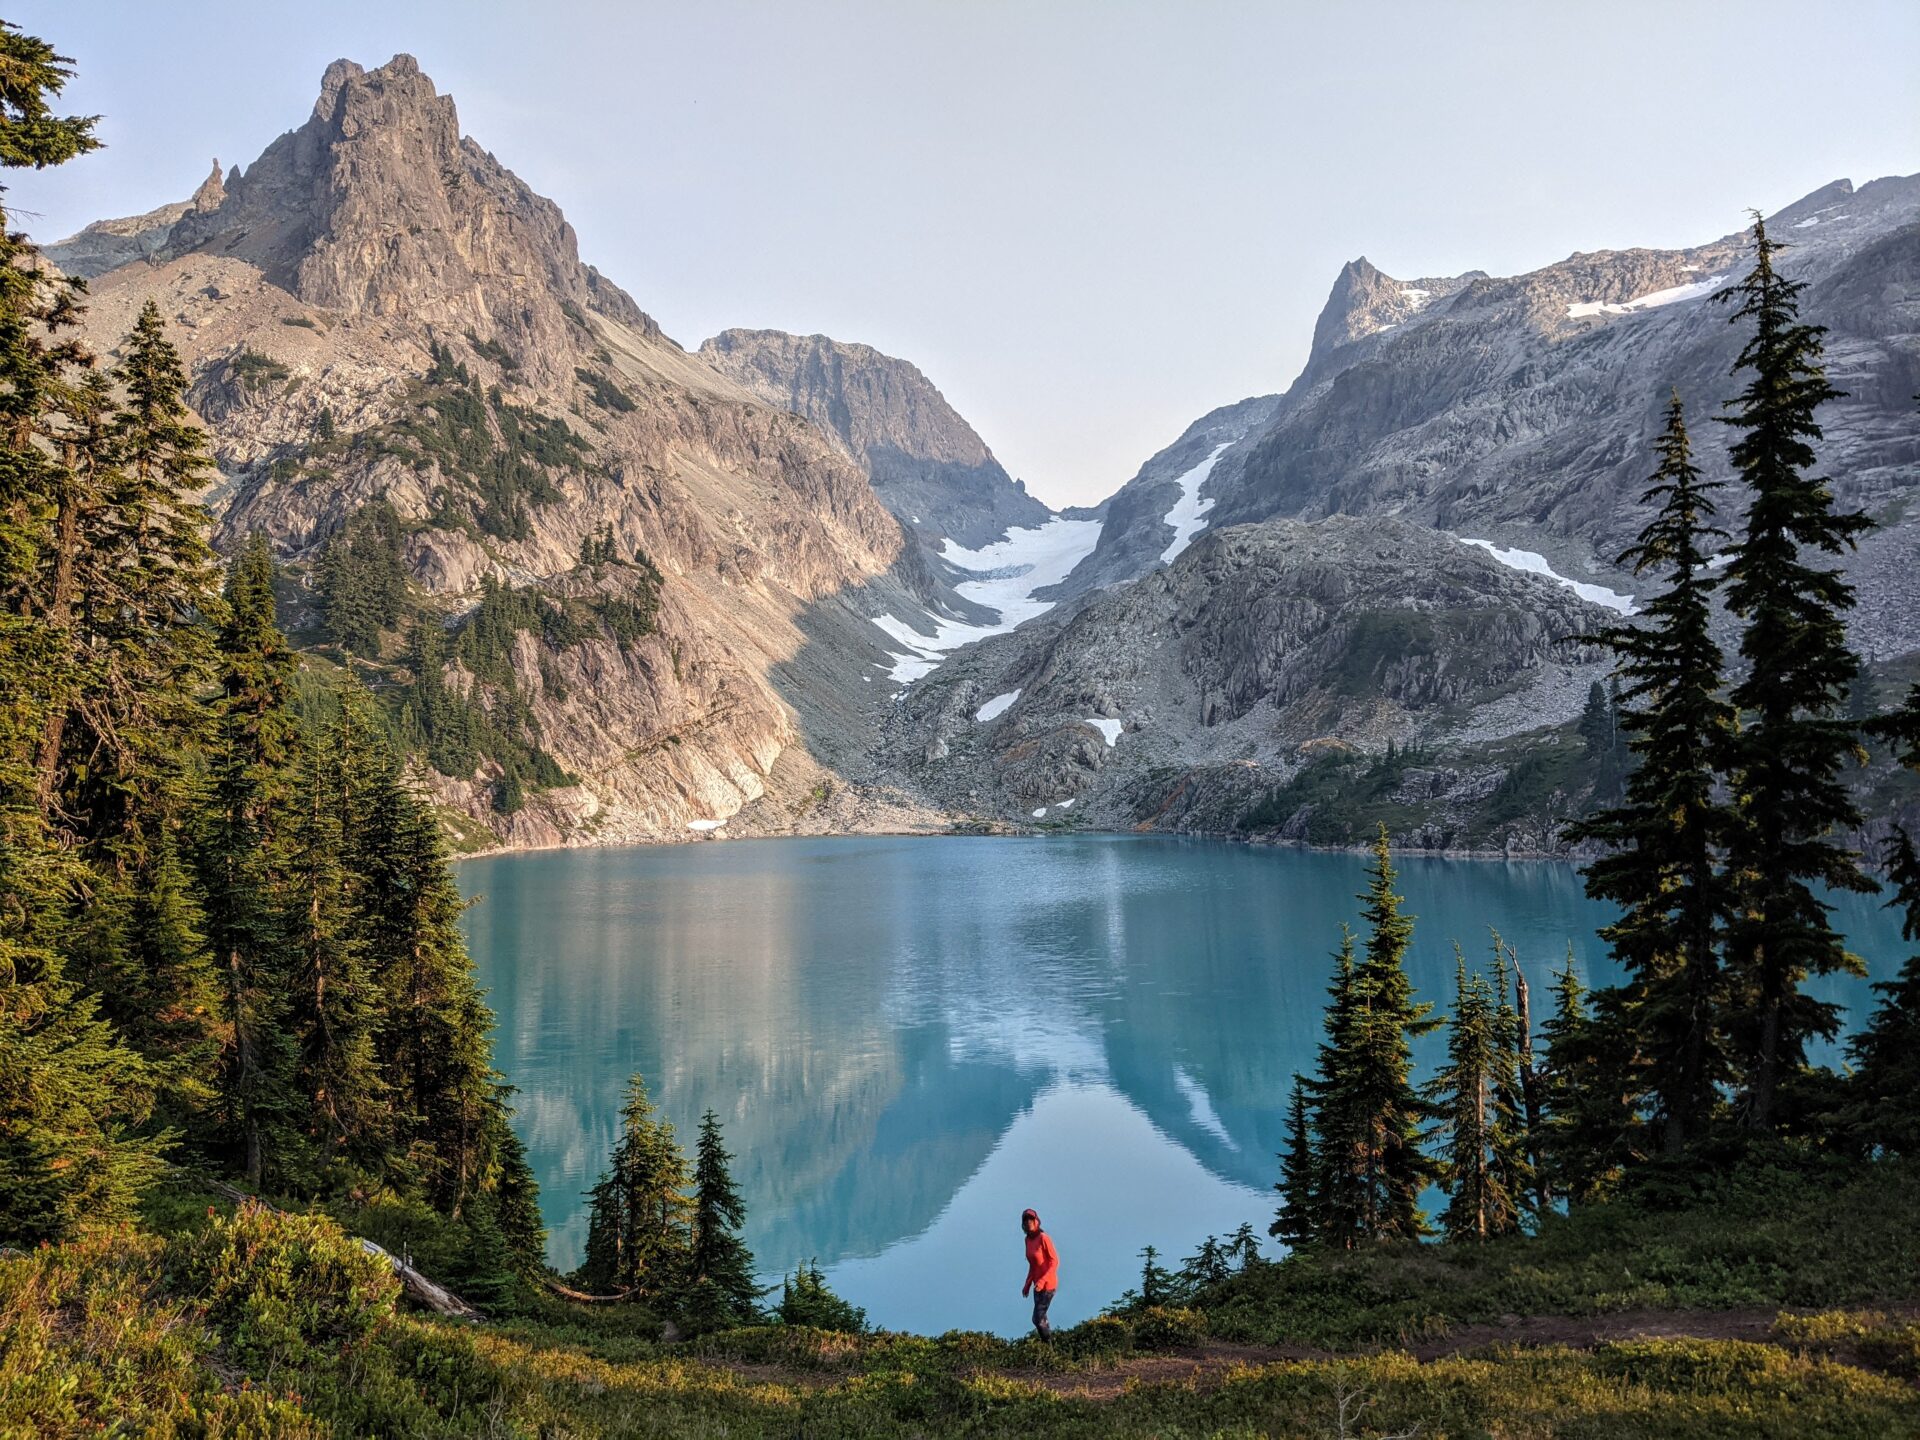 The best view of Jade Lake in Washington